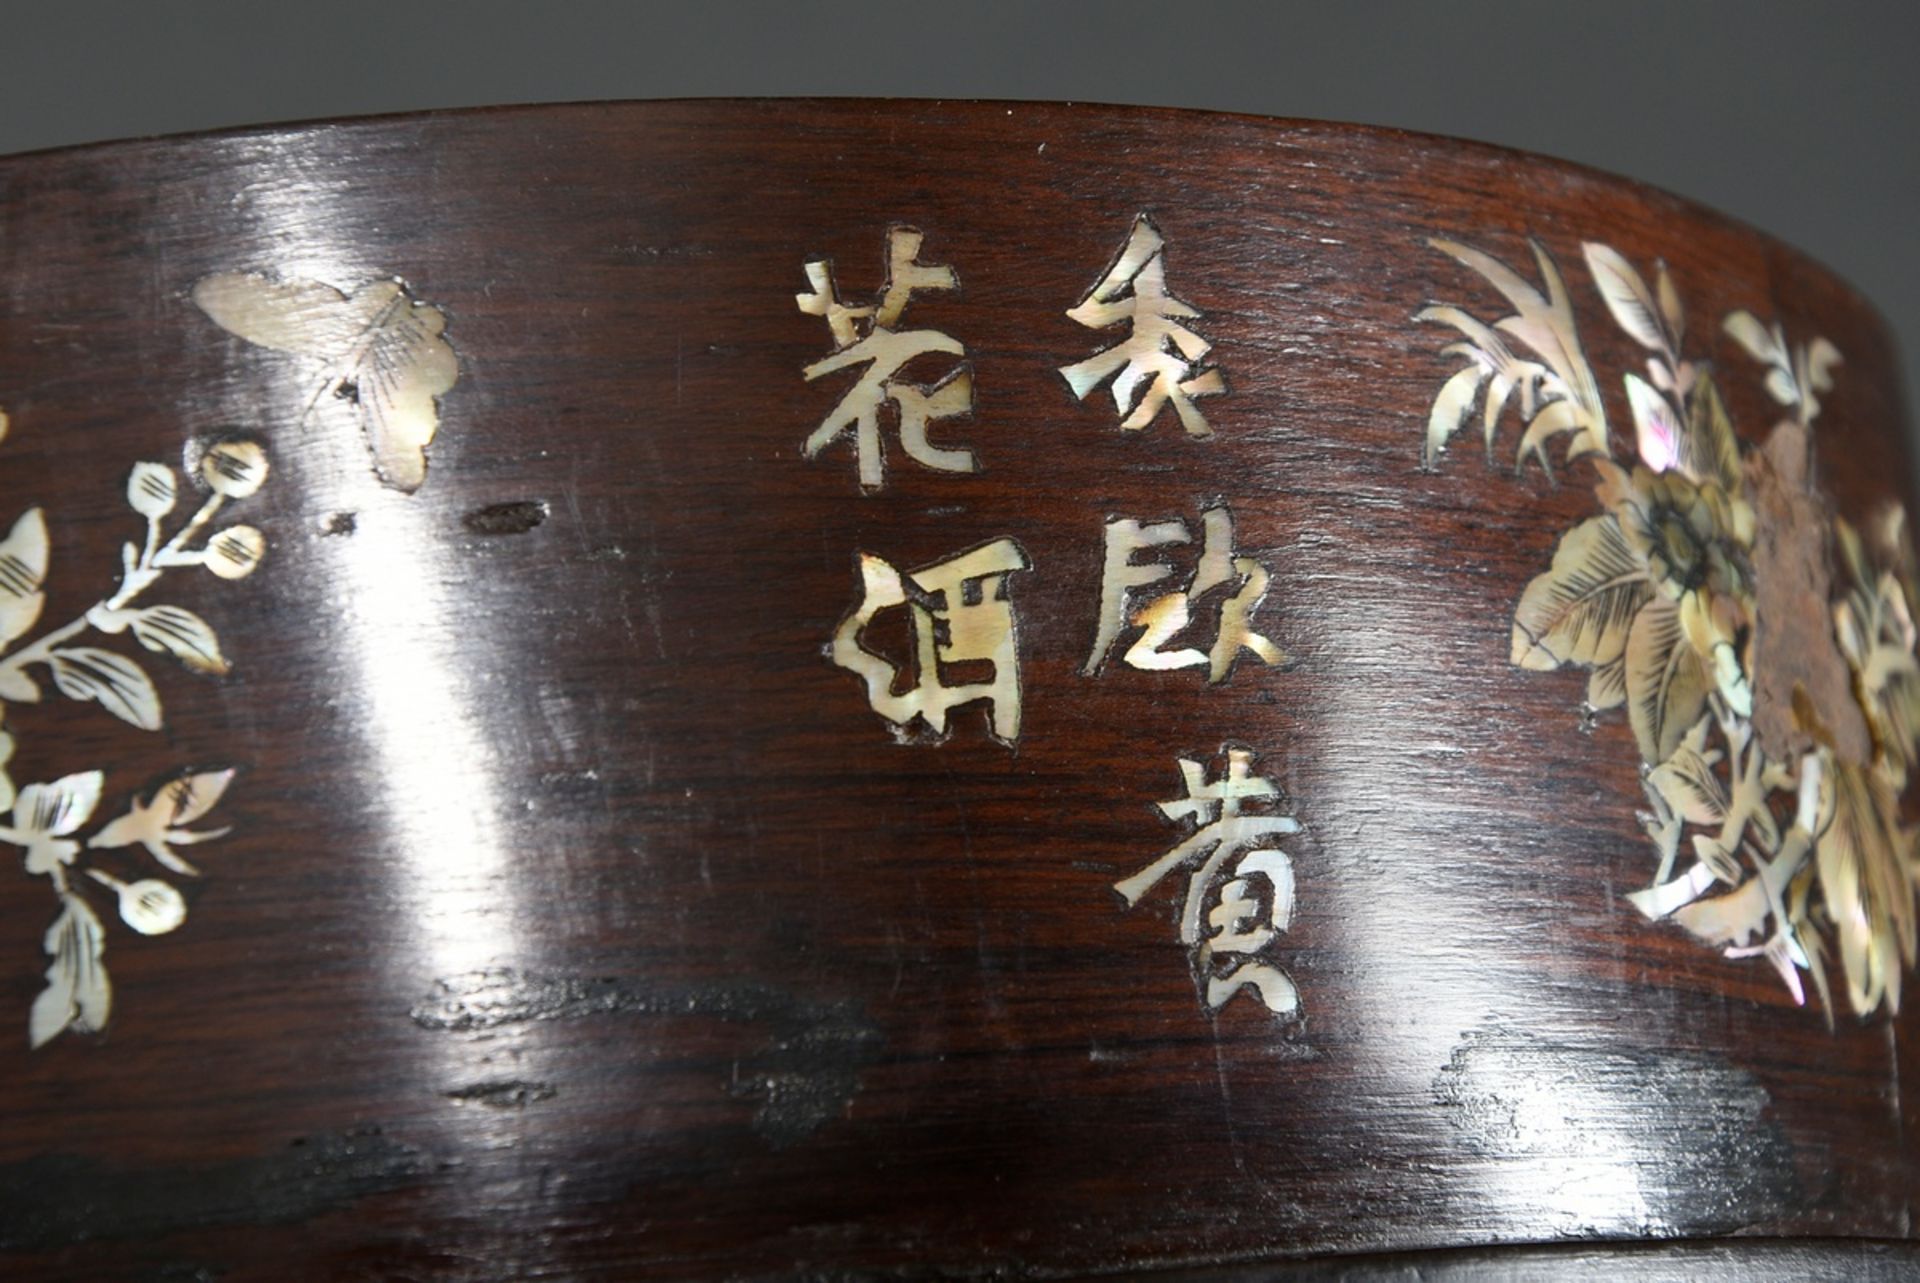 Large round wooden lidded box with mother-of-pearl inlays "Flowers, Fruits and Birds", South China - Image 7 of 7